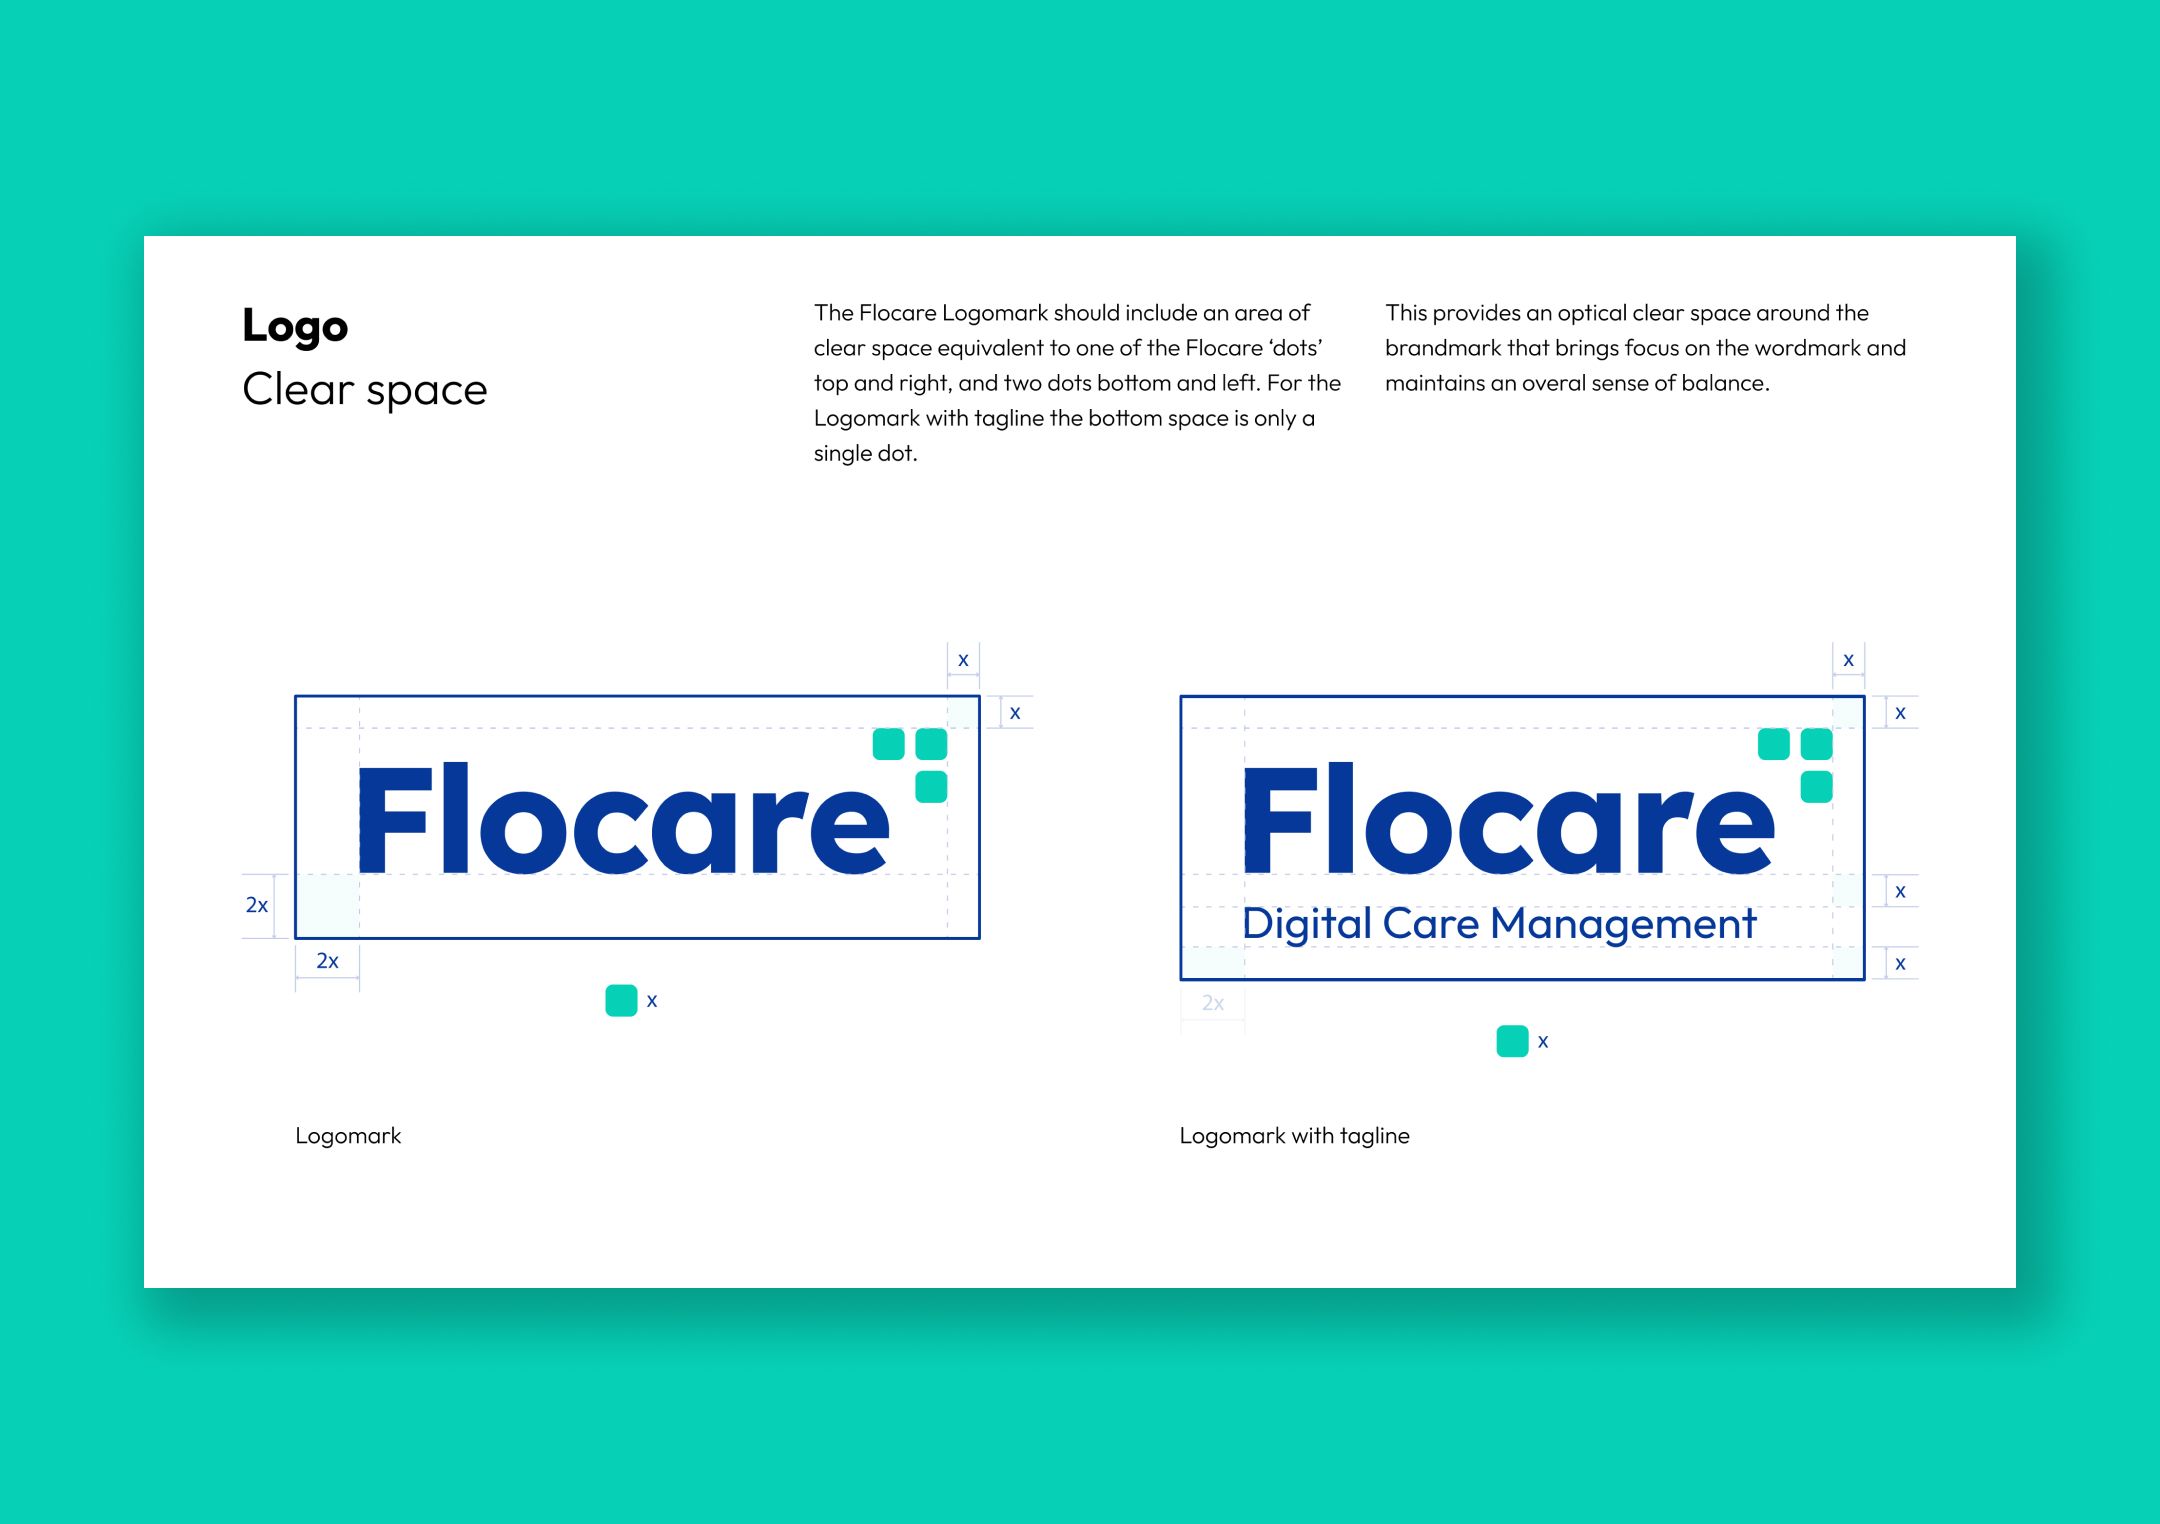 Flocare brand guidelines page concerning the logo construction